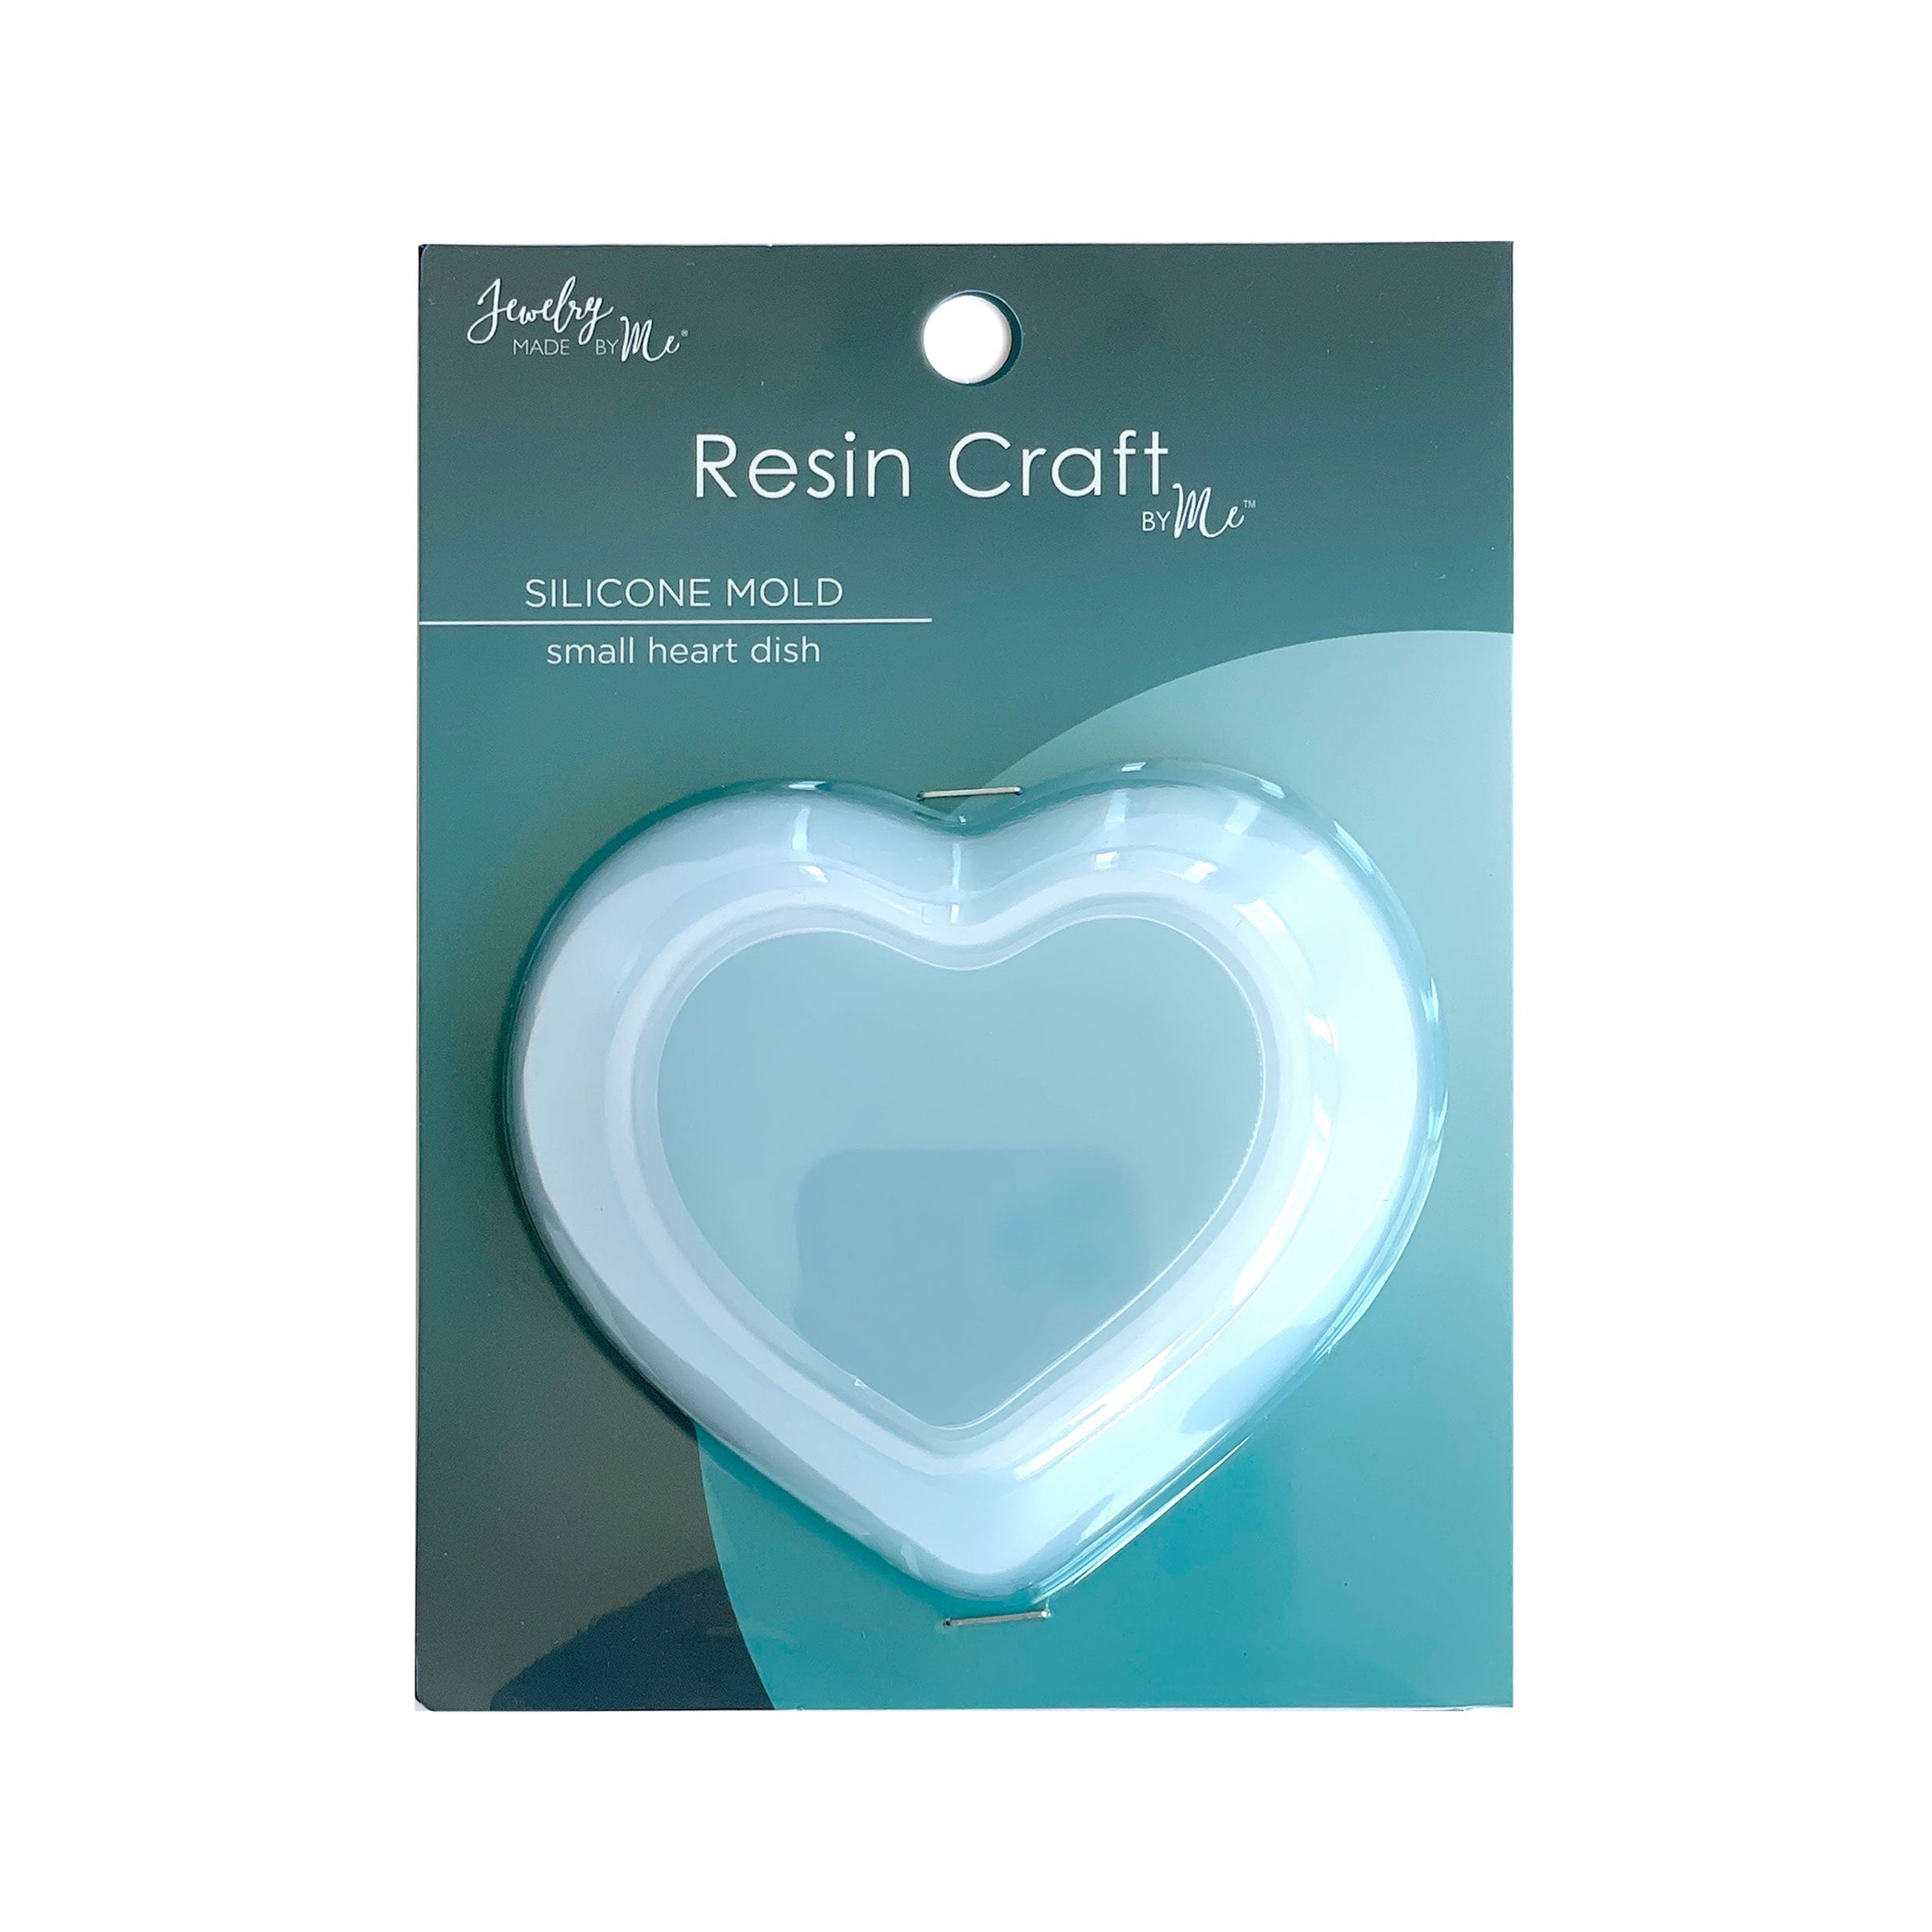 Resin Craft by Me Silicone Mold-Small Heart Dish